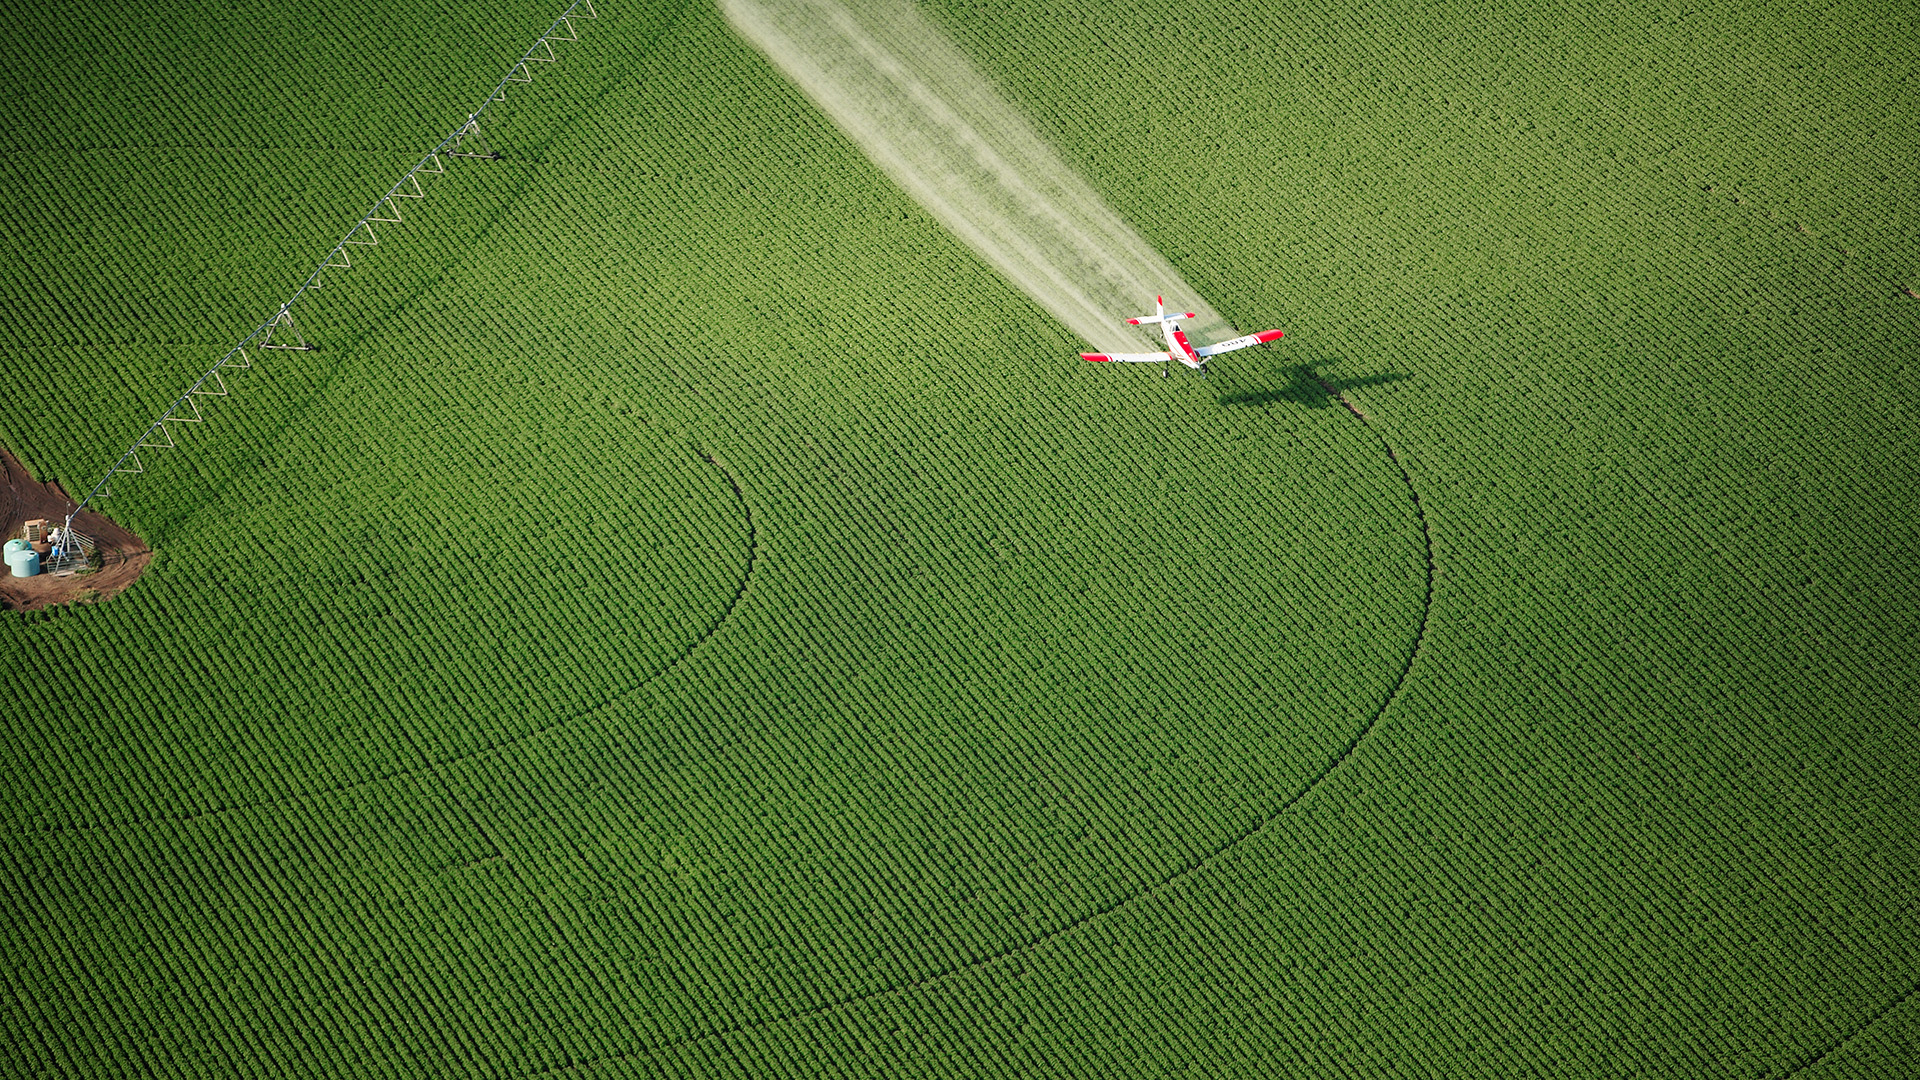 Image of a plane flying over a field